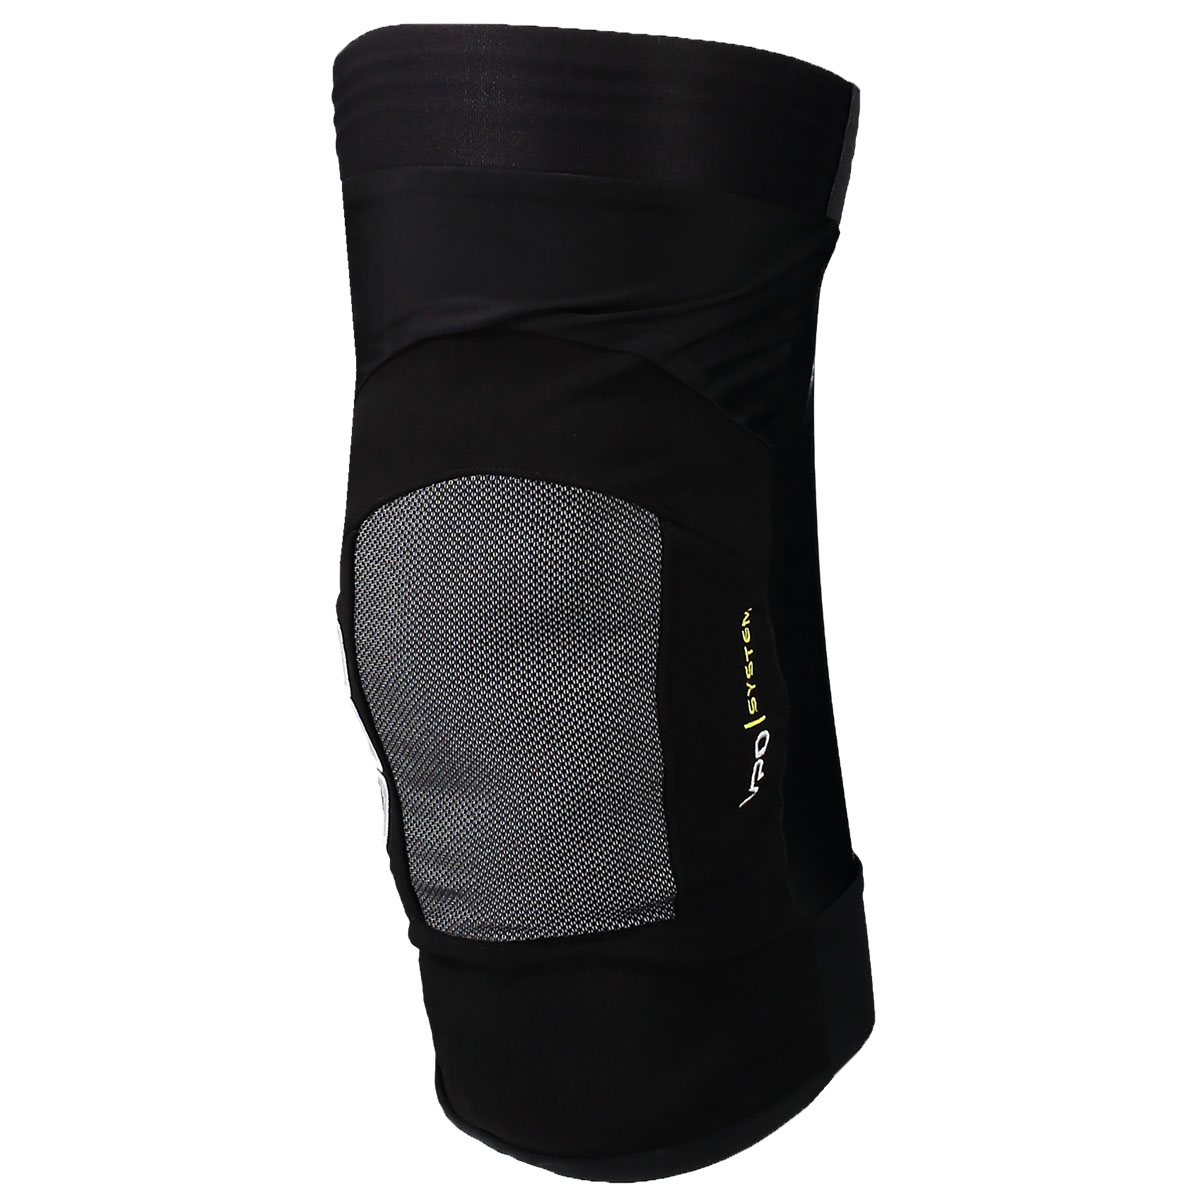 POC JOINT VPD KNEE PADS